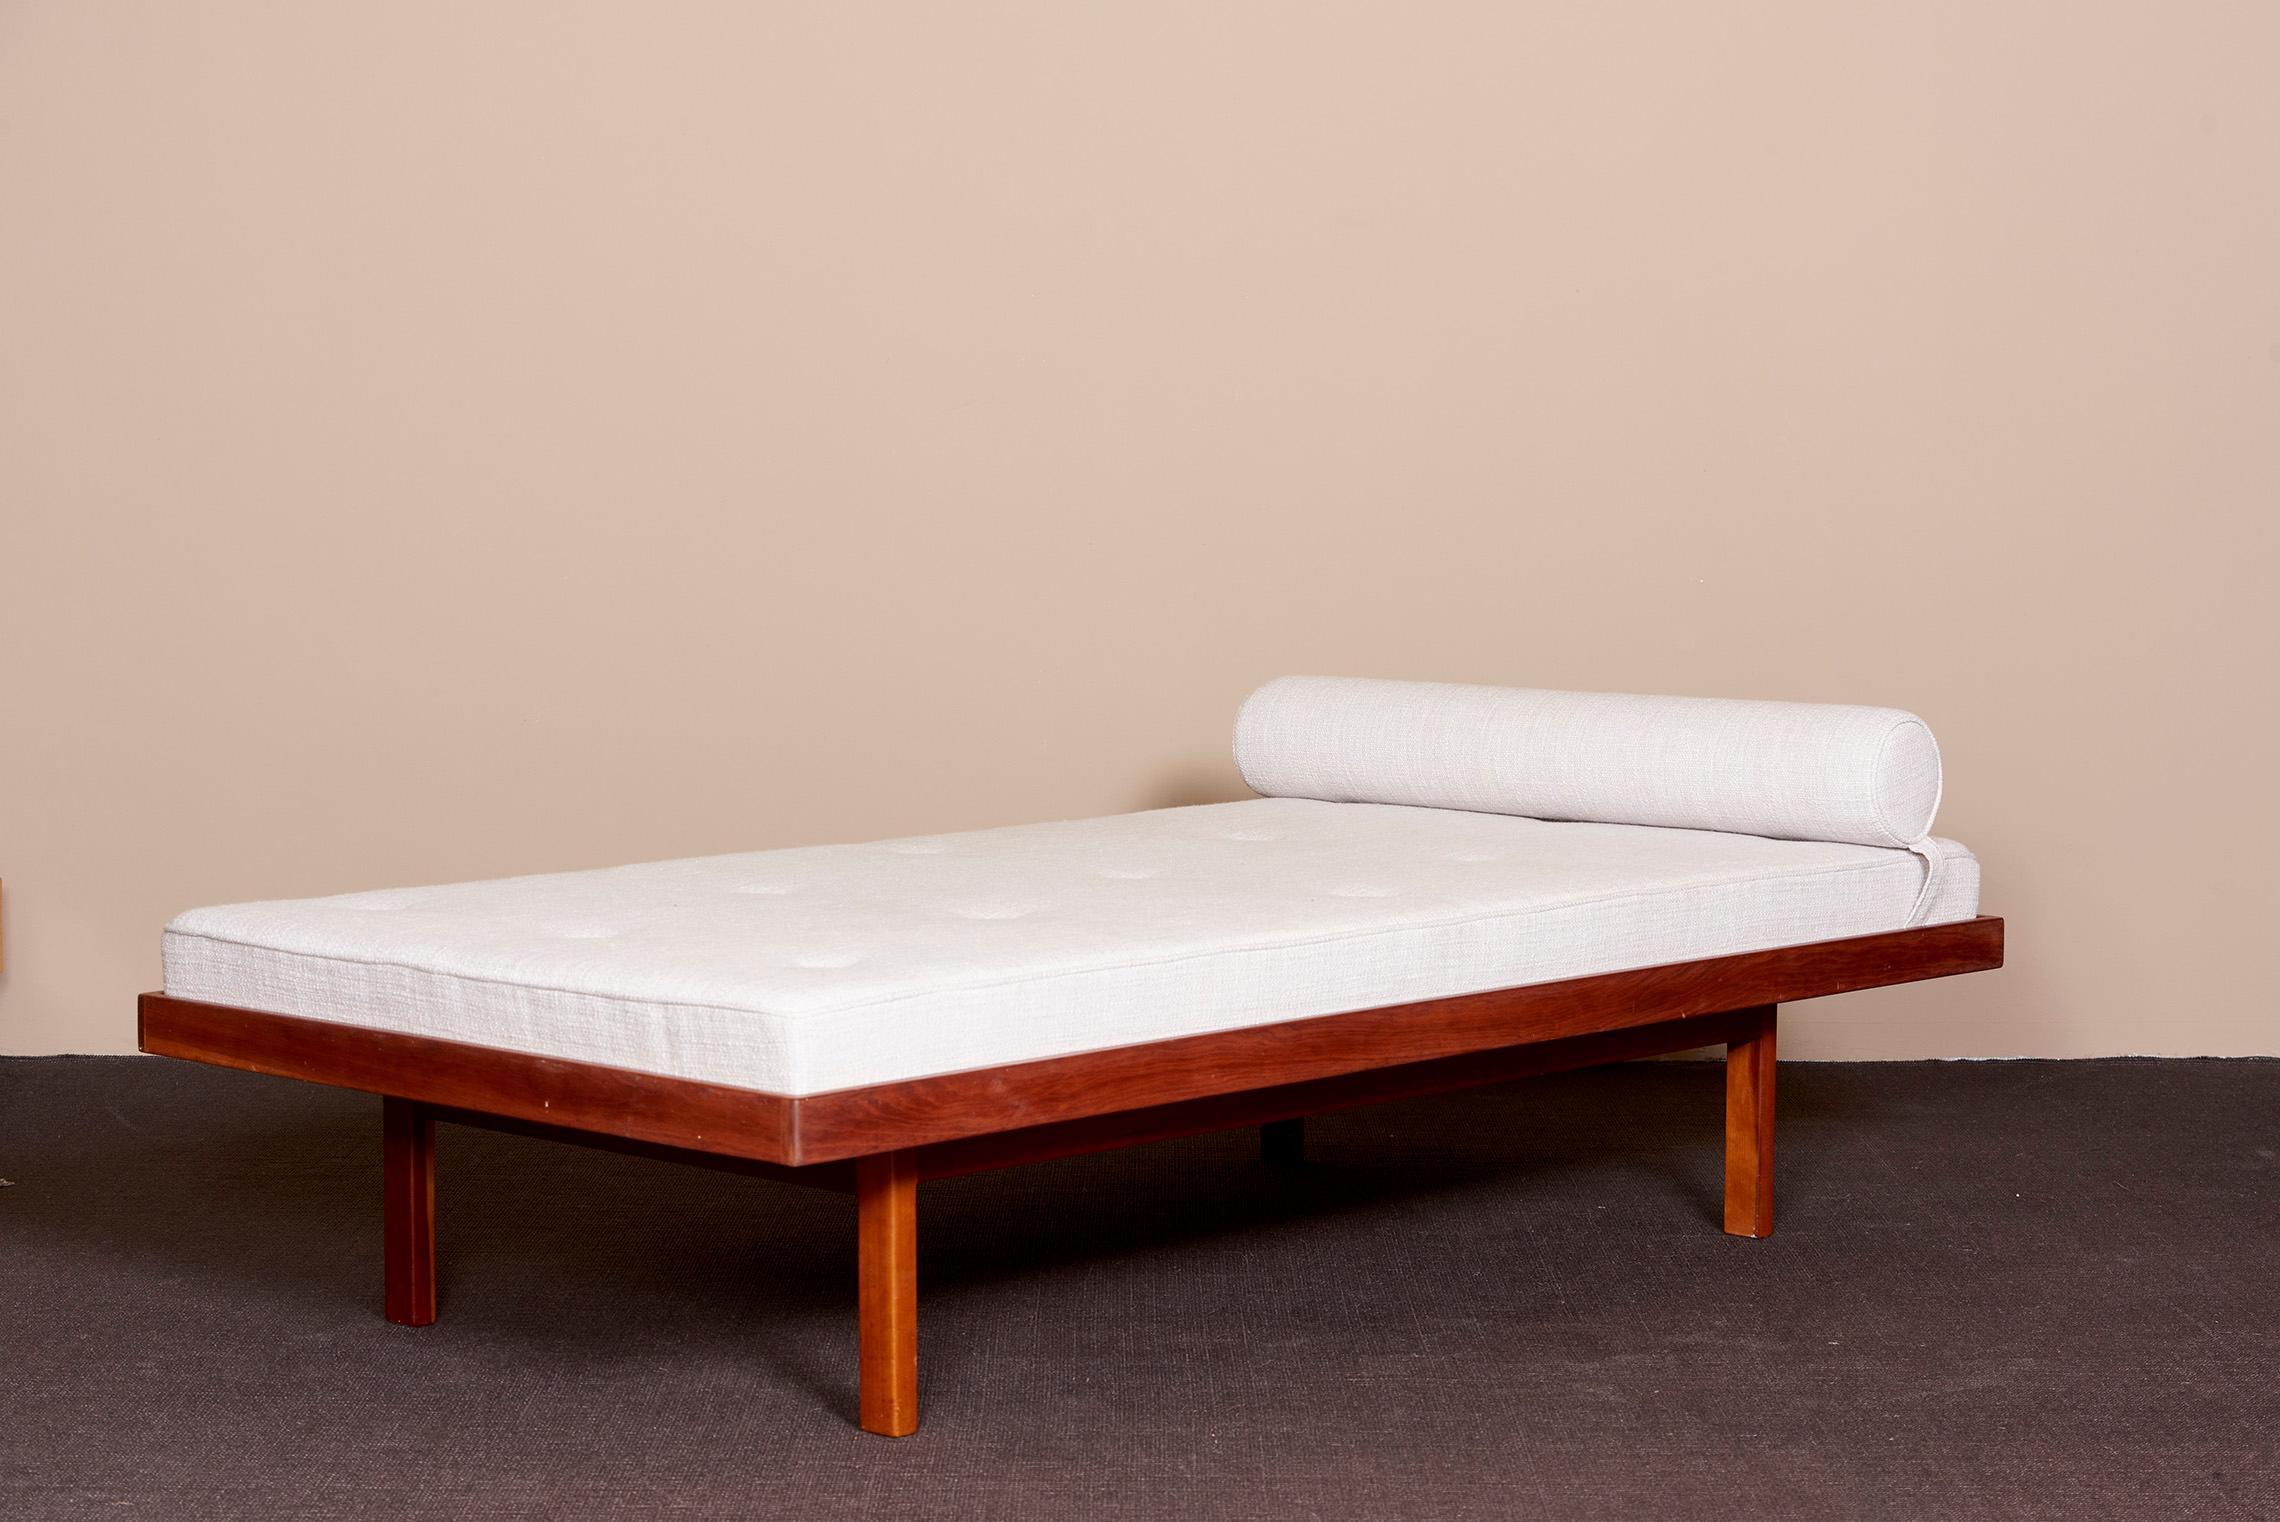 1 of 2 American Studio Walnut Frame Daybeds in Mark Alexander Fabric, US 1960s For Sale 1